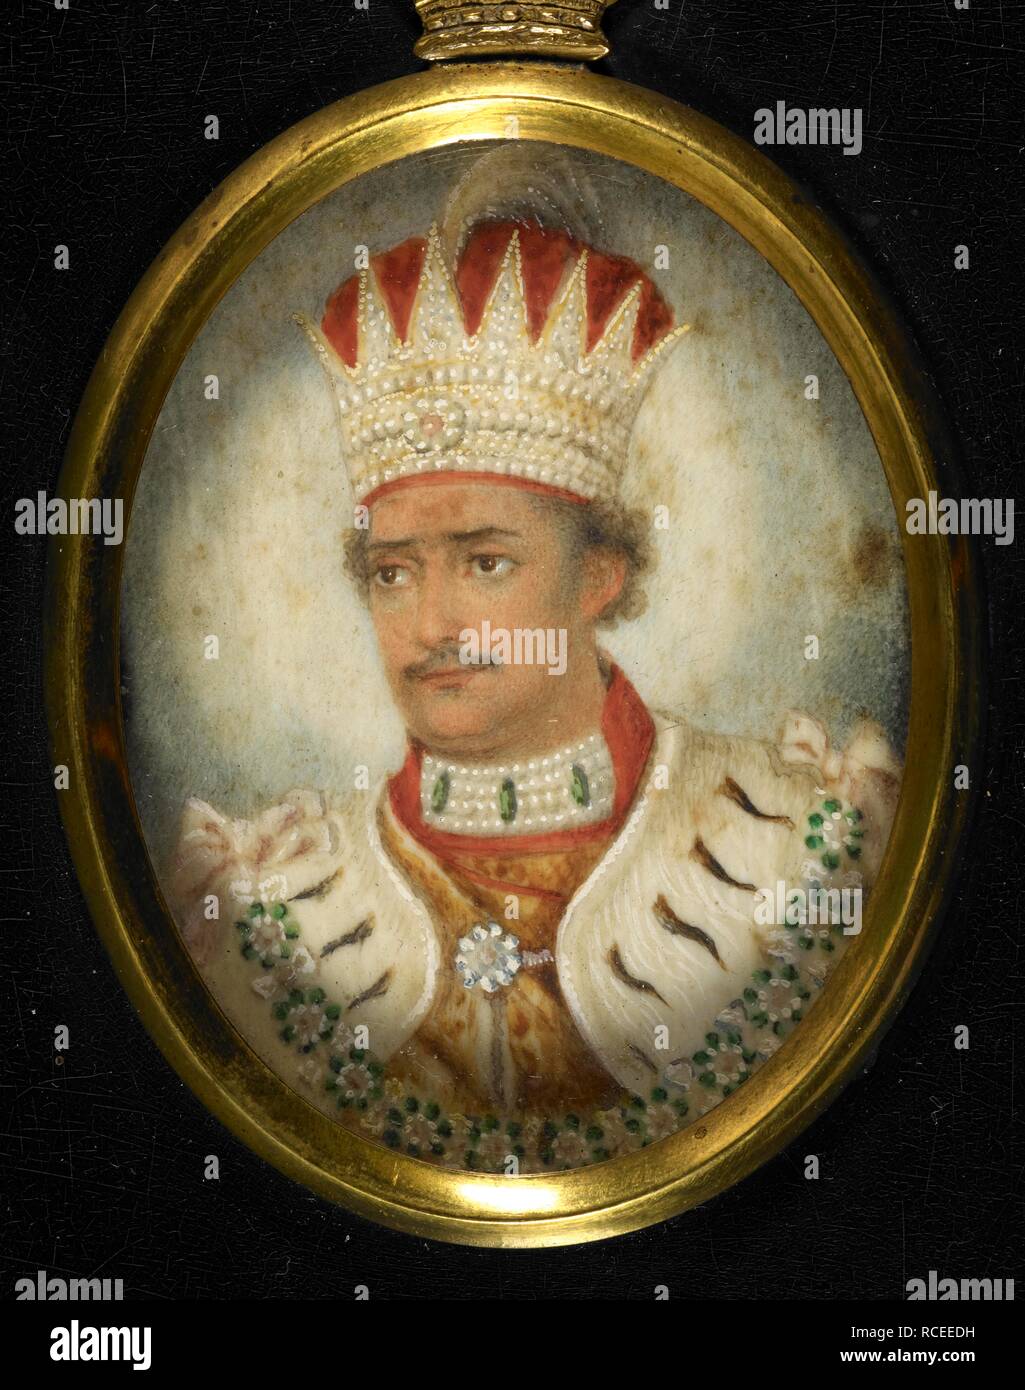 Portrait of Ghazi al-Din Haidar (Nawab and, after 1819, King of Oudh, 1814-27). Head and shoulders, wearing a crown and ermine cape. Oval; water-colour on ivory; 2.5 by 2 ins. (Amherst collection). By a Lucknow artist, 1826. Source: Add.Or. 2540. Author: ANON. Stock Photo